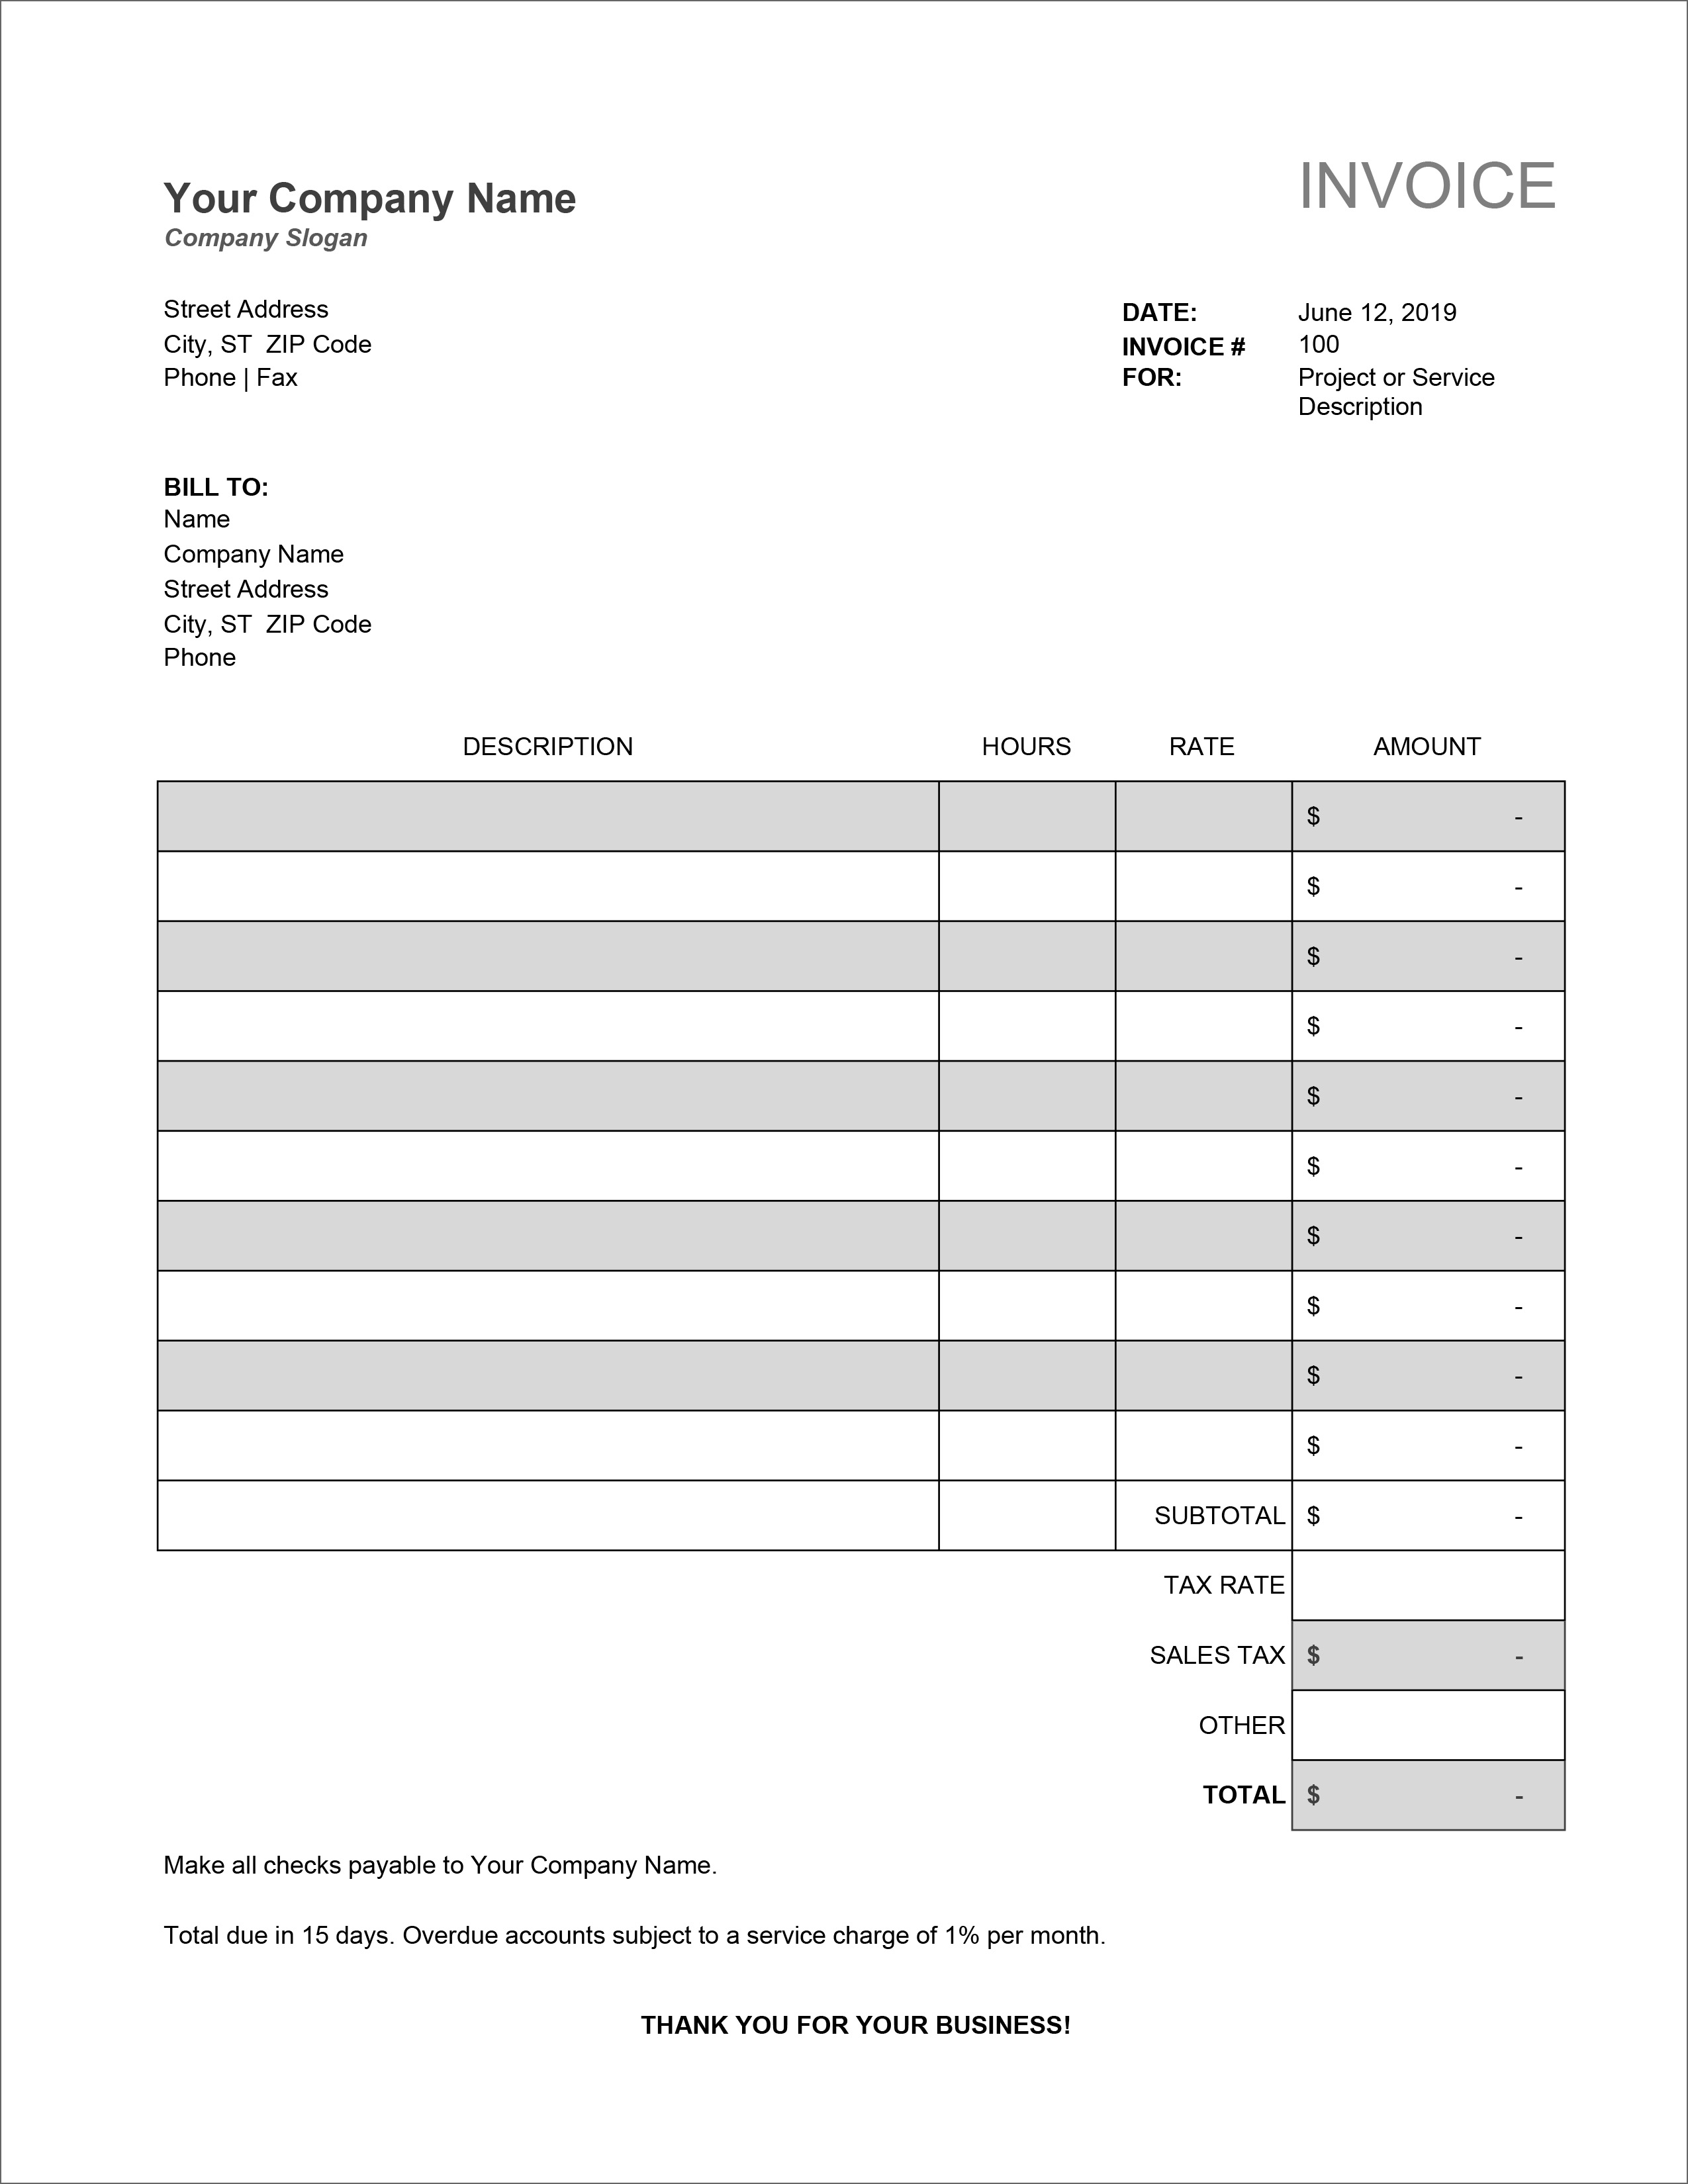 microsoft word invoice template download